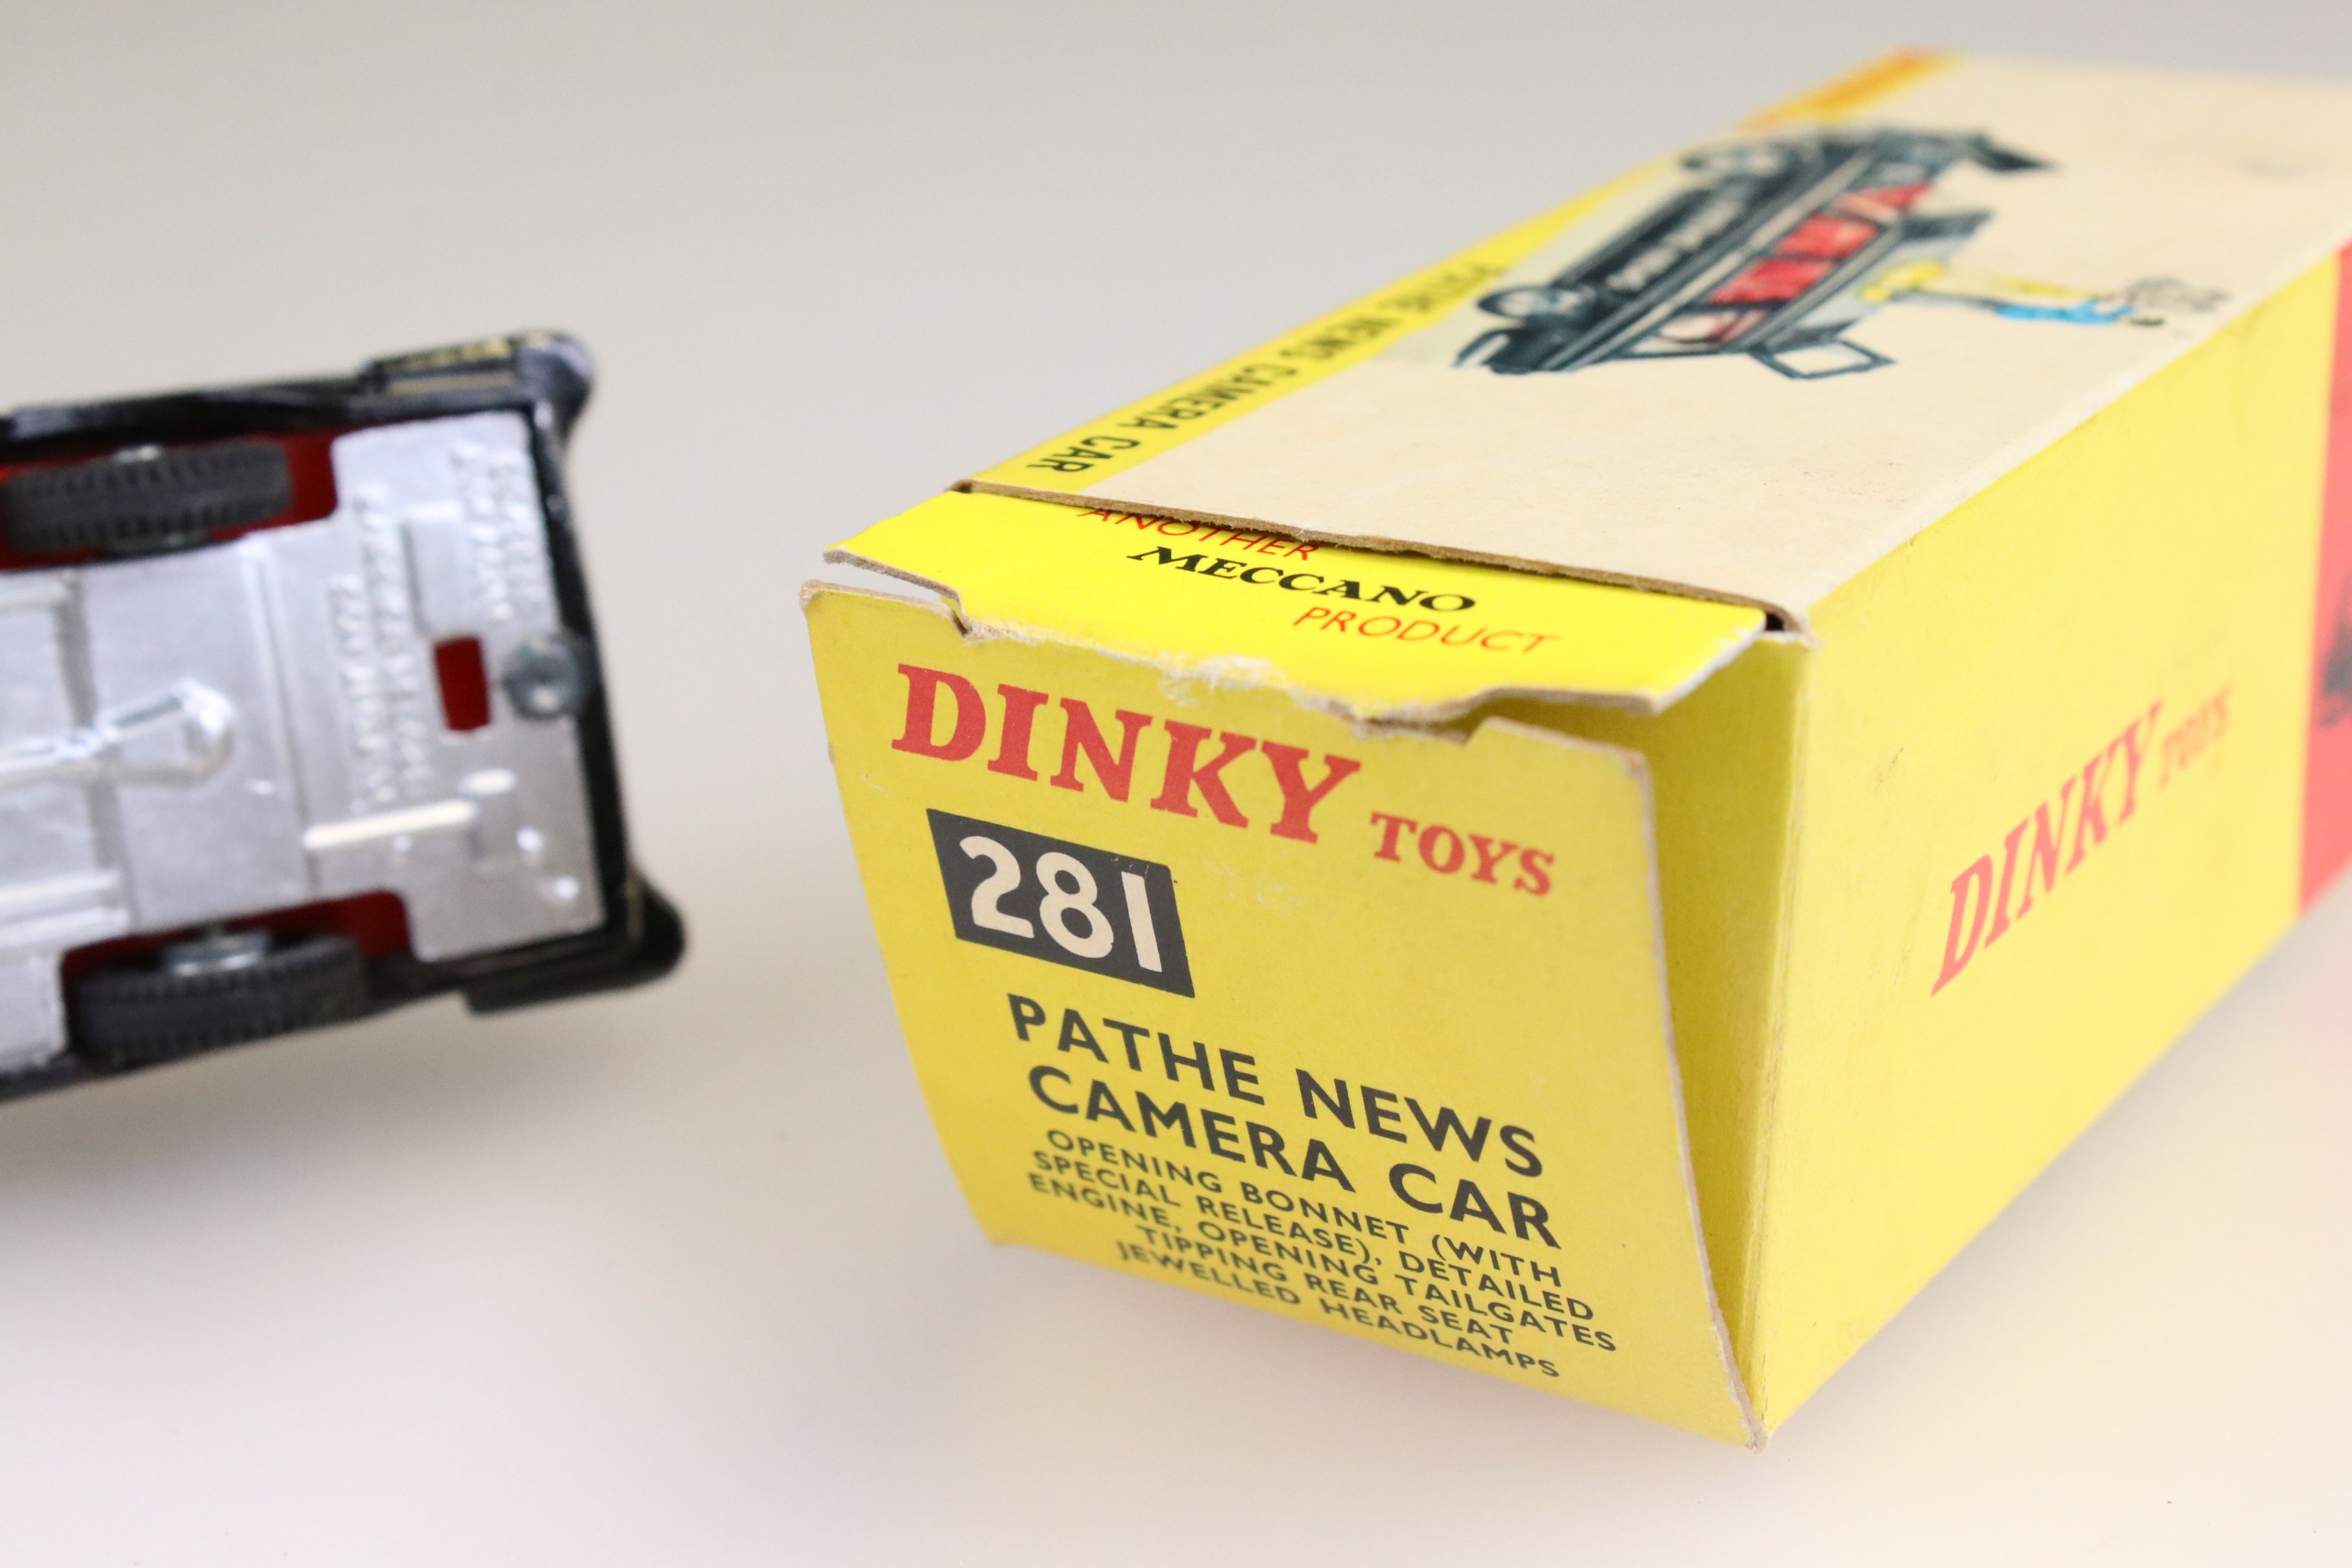 Boxed Dinky 281 Pathe News Camera Car diecast model complete with cameraman figure, diecast & decals - Image 10 of 12